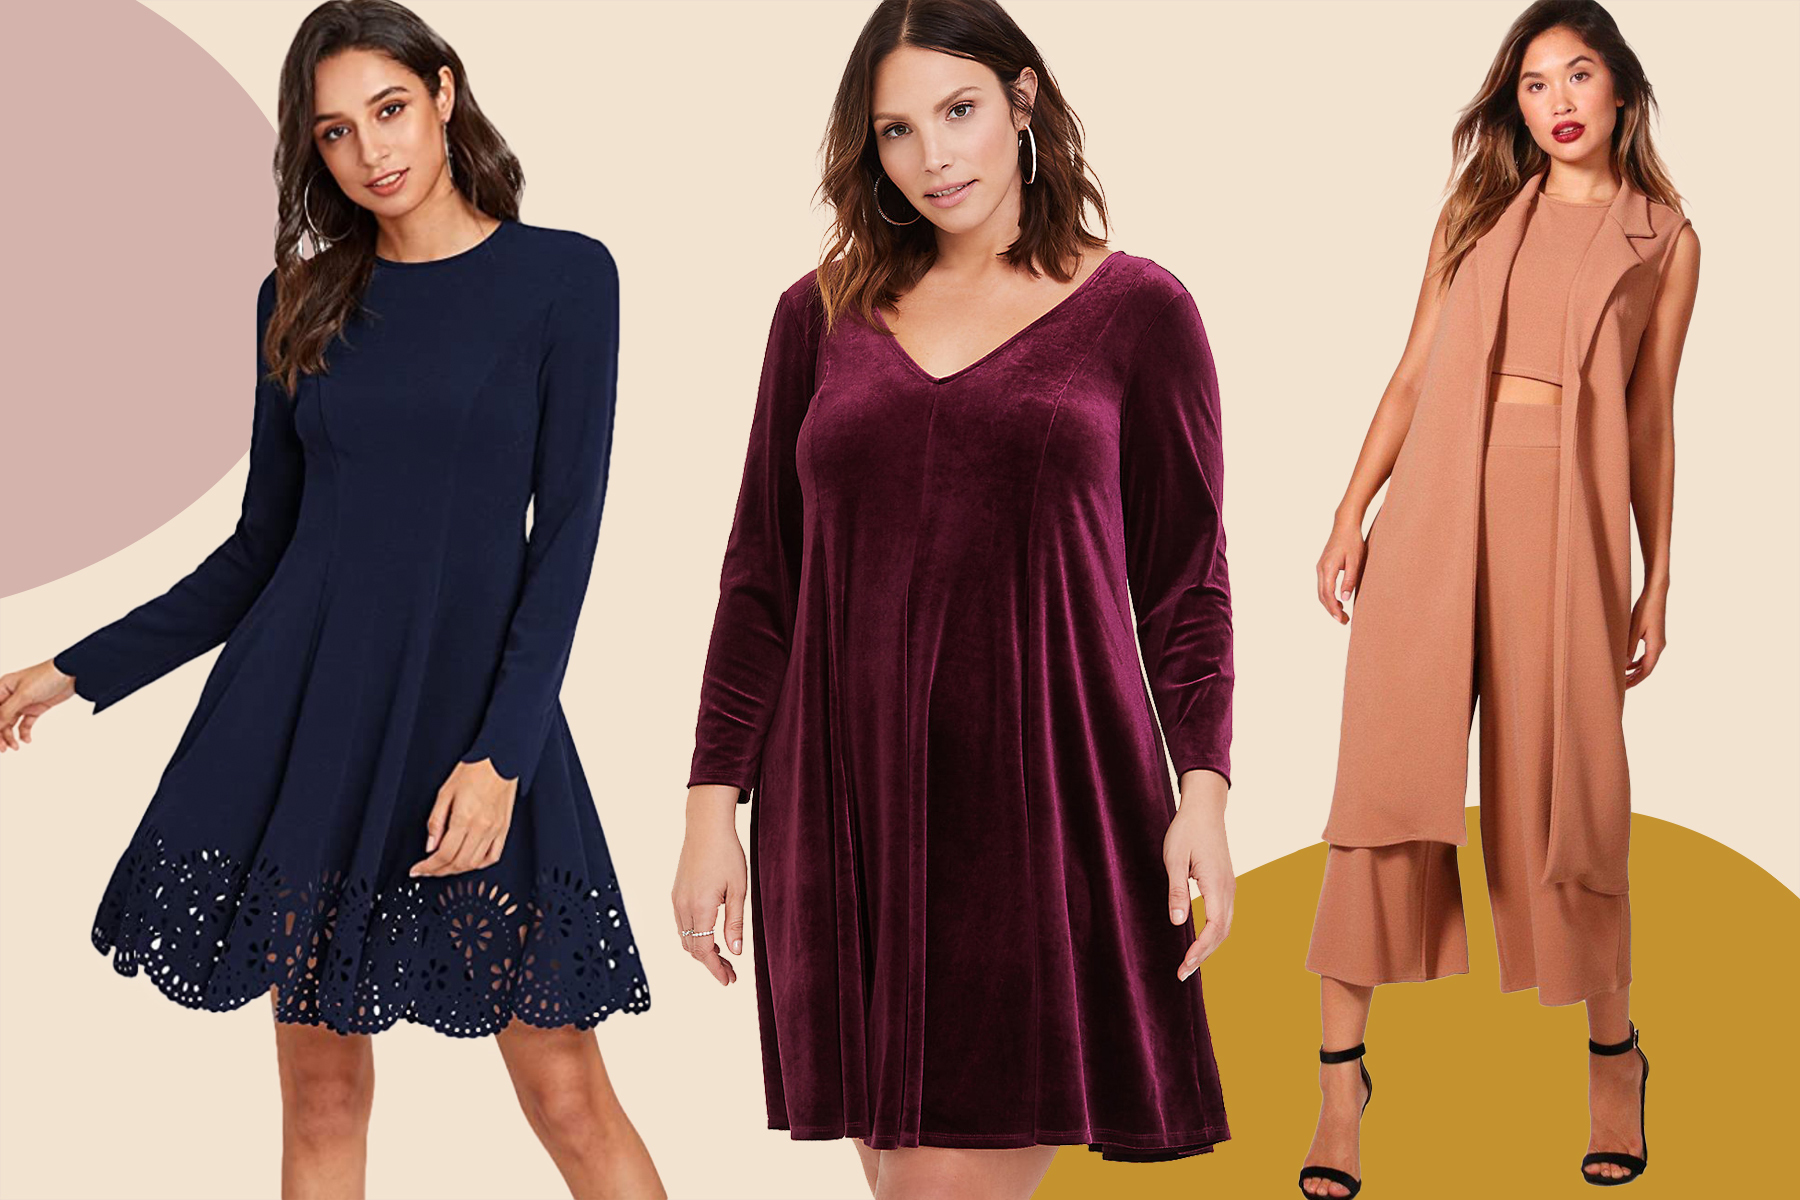 11 Affordable Holiday Outfits to Shop: Holiday Dresses Under $100 | HelloGiggles